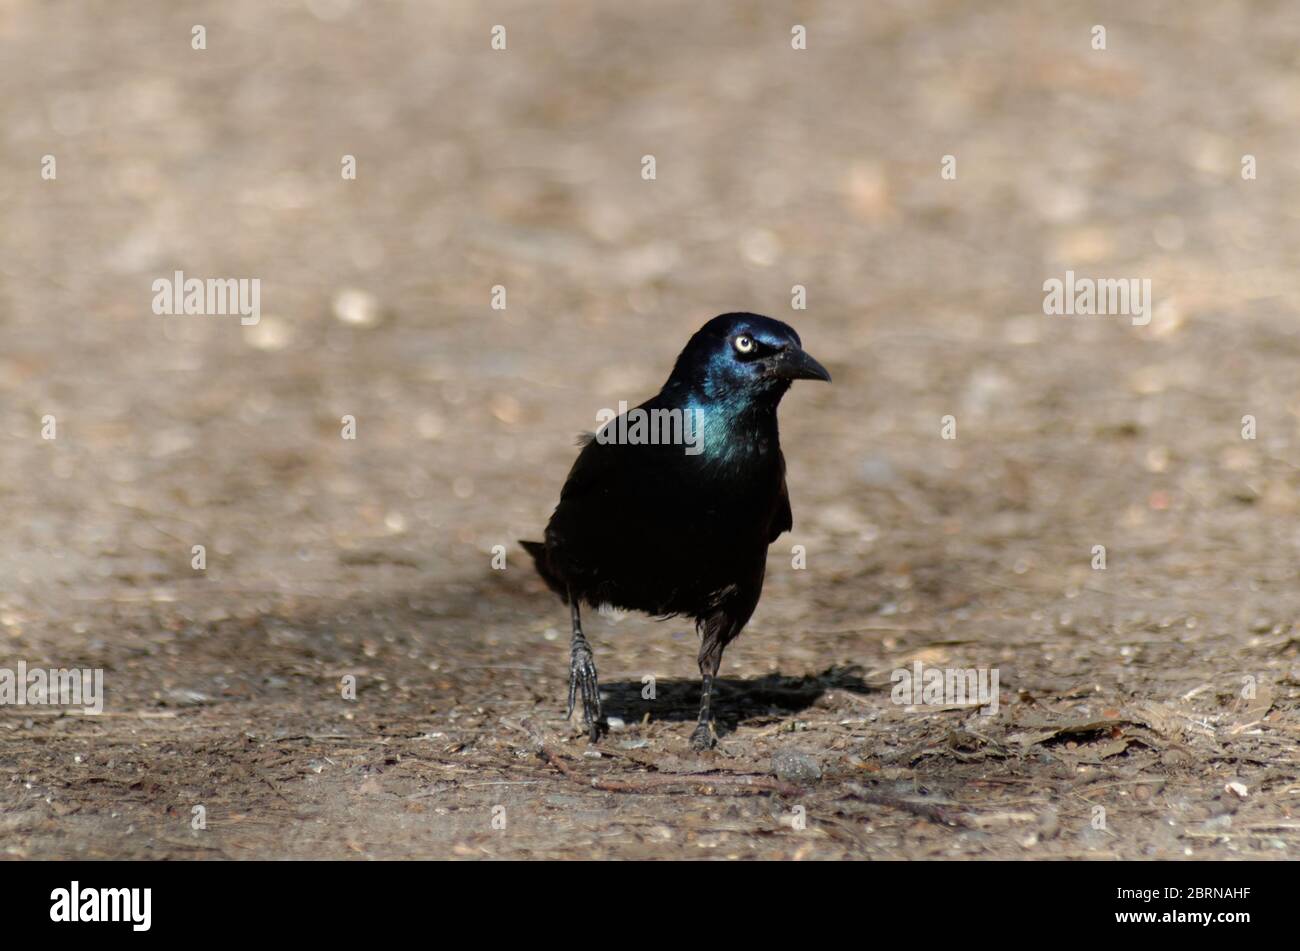 A Common Grackle (Quiscalus quiscula) Stock Photo